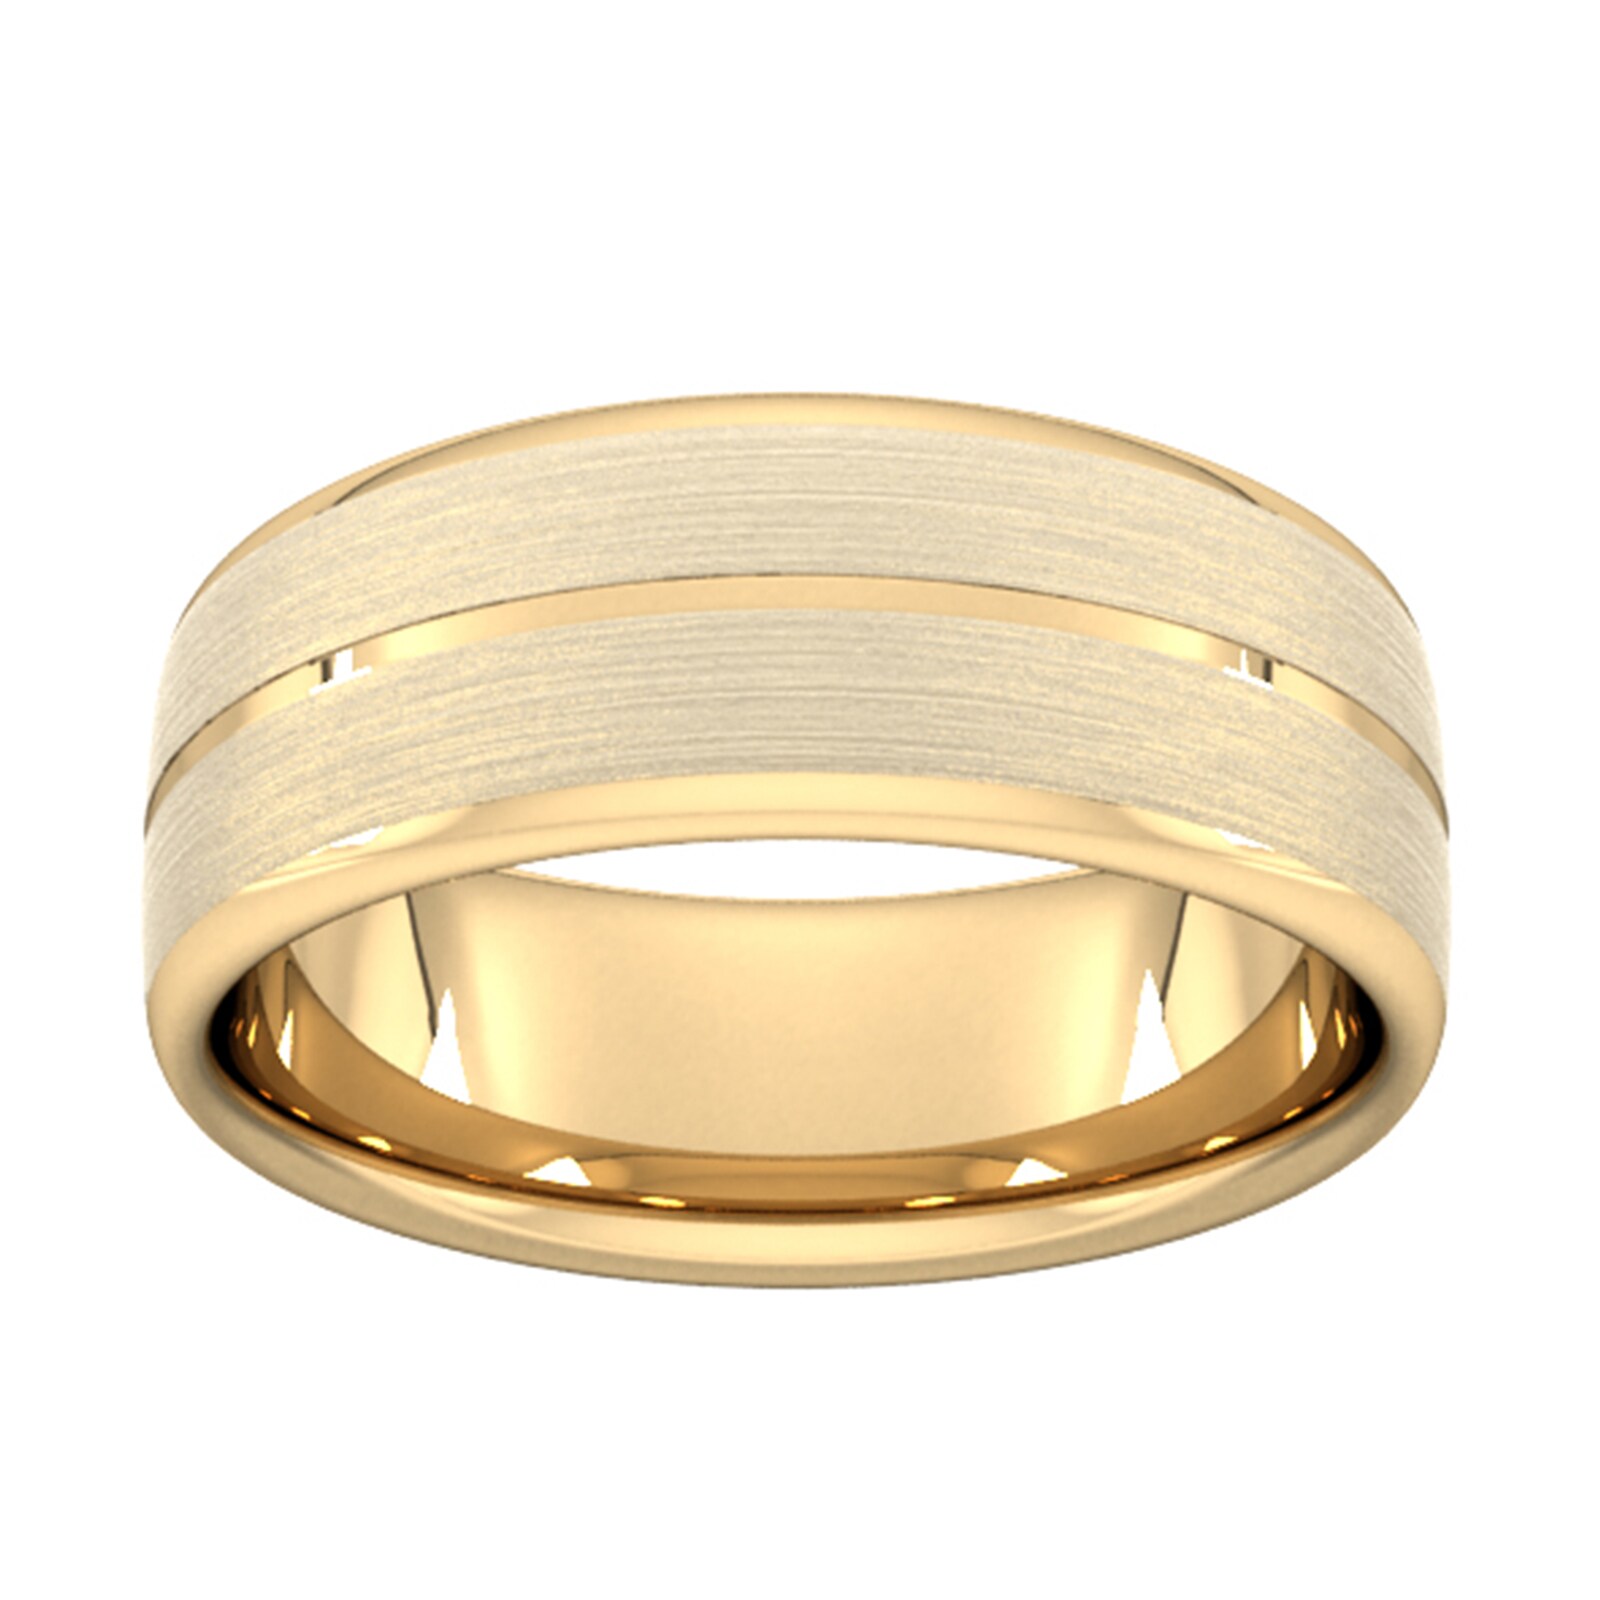 8mm D Shape Standard Centre Groove With Chamfered Edge Wedding Ring In 9 Carat Yellow Gold - Ring Size R